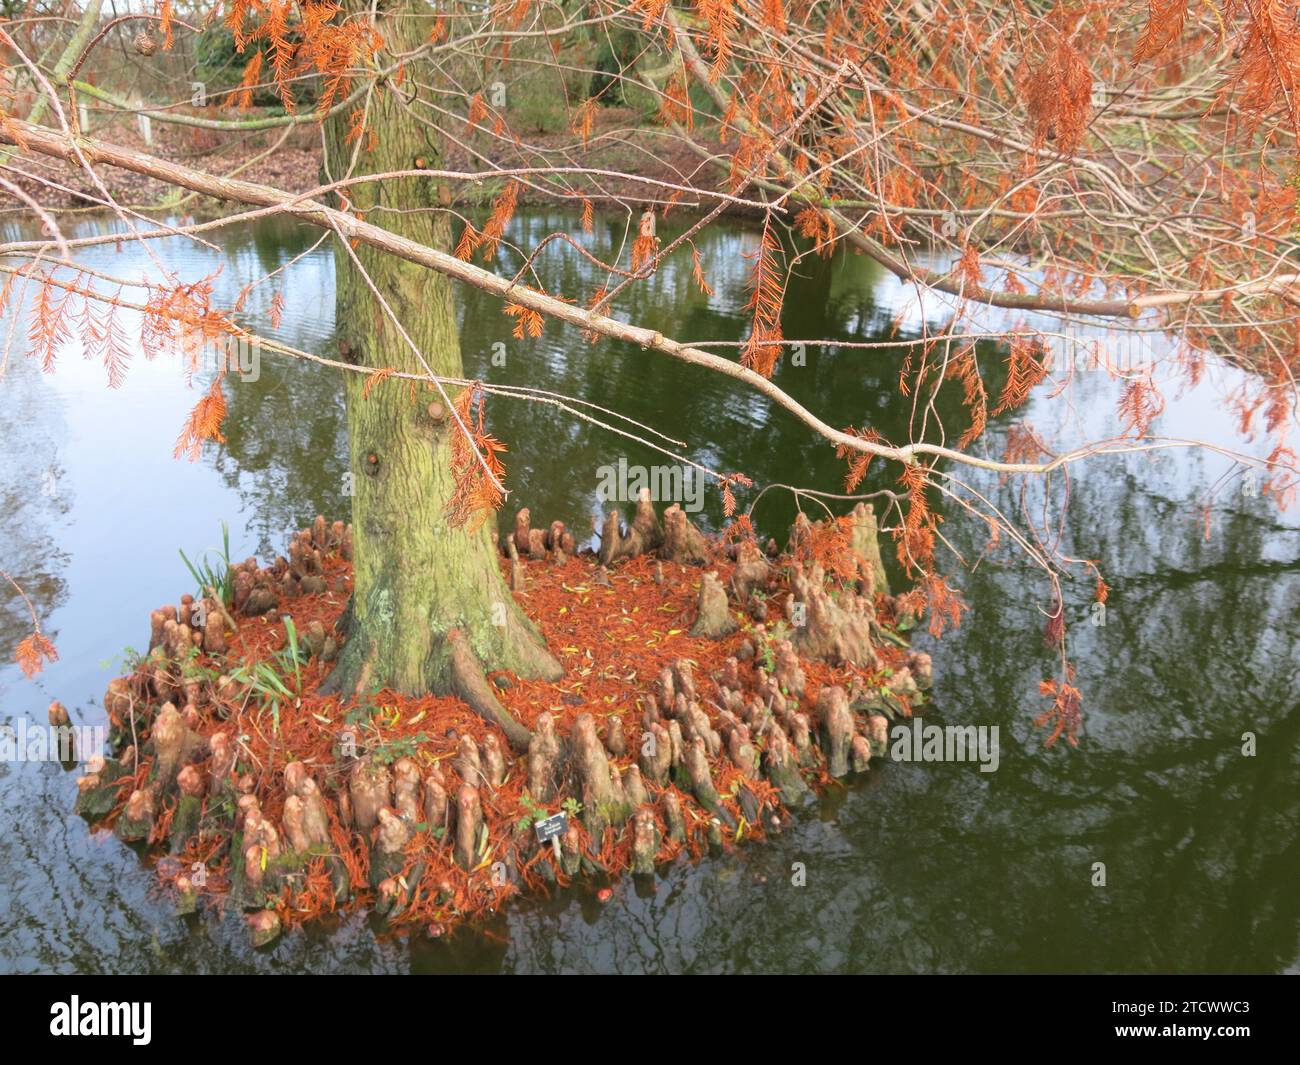 The swamp cypress Taxodium Distichum is characterised by the woody projections or knees at the base of the tree and the russet red foliage in winter. Stock Photo